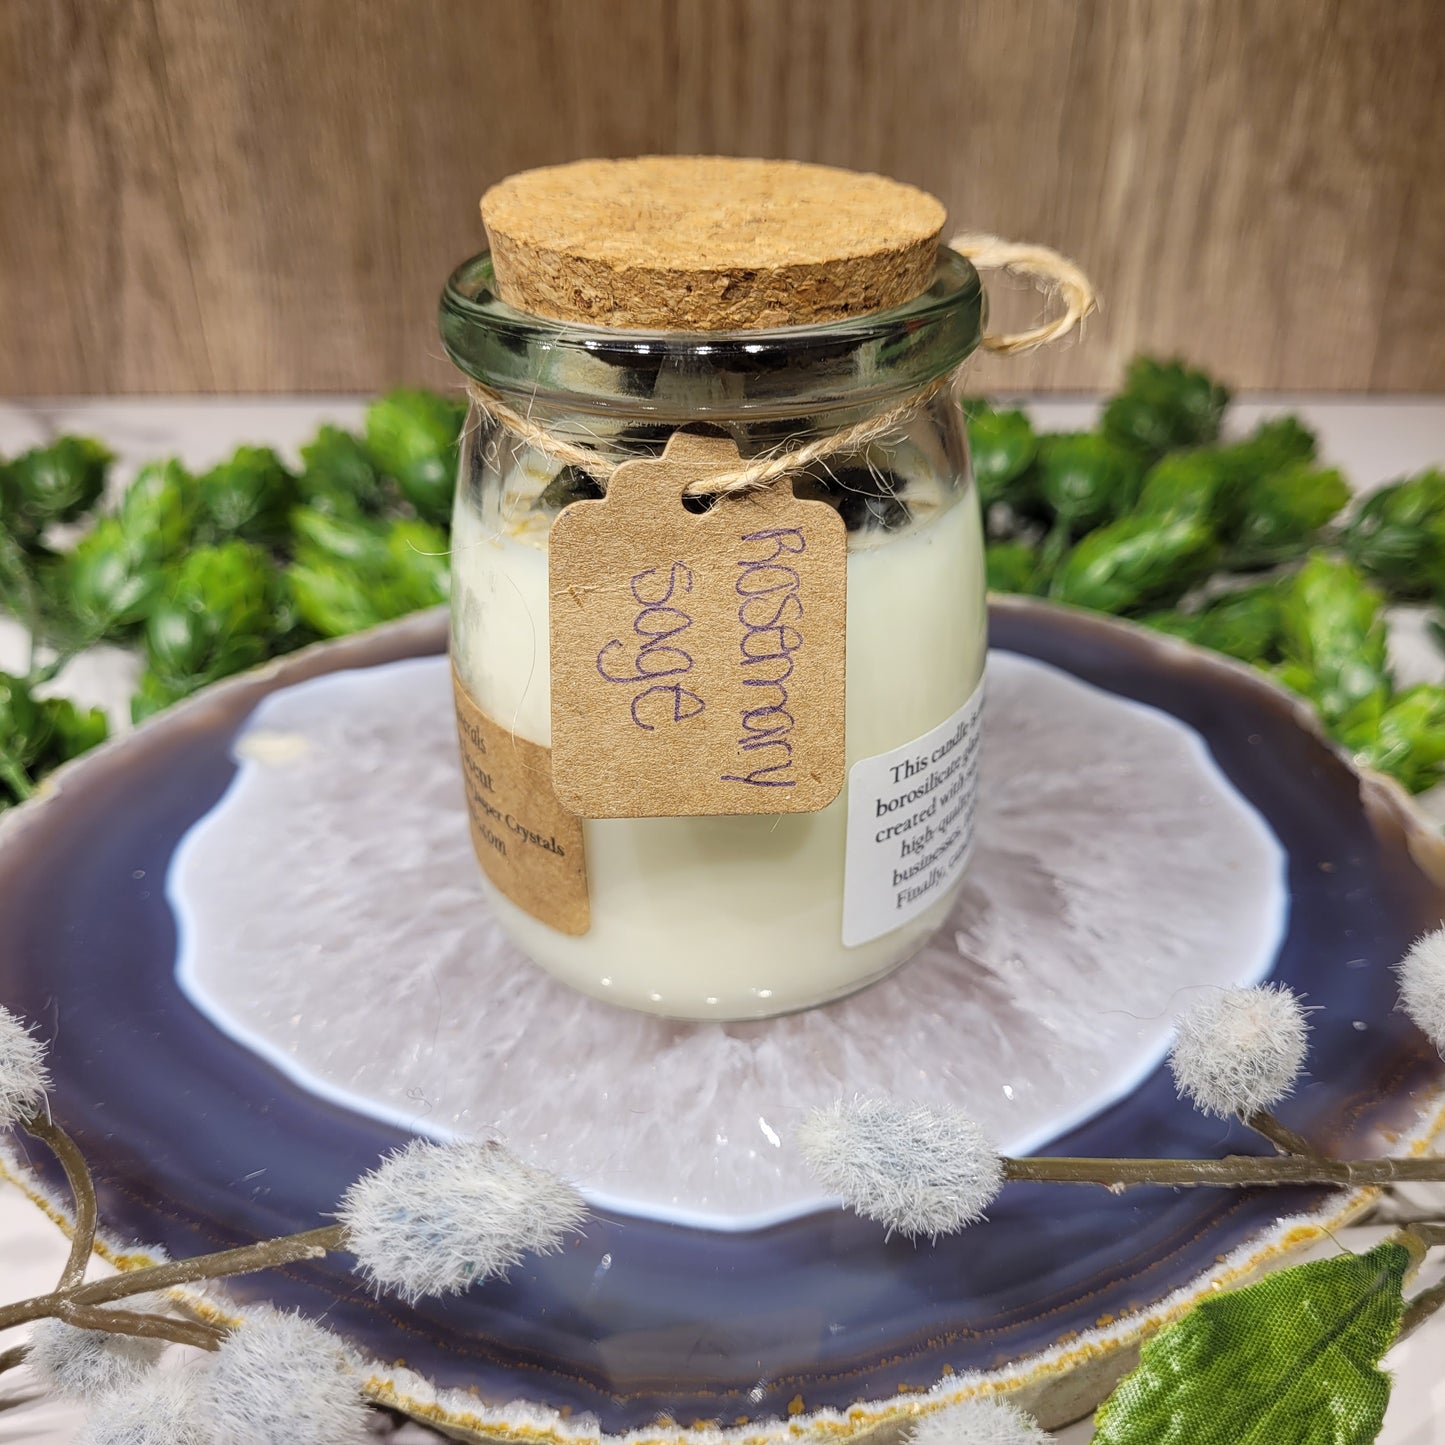 Rosemary Sage Soy Candle